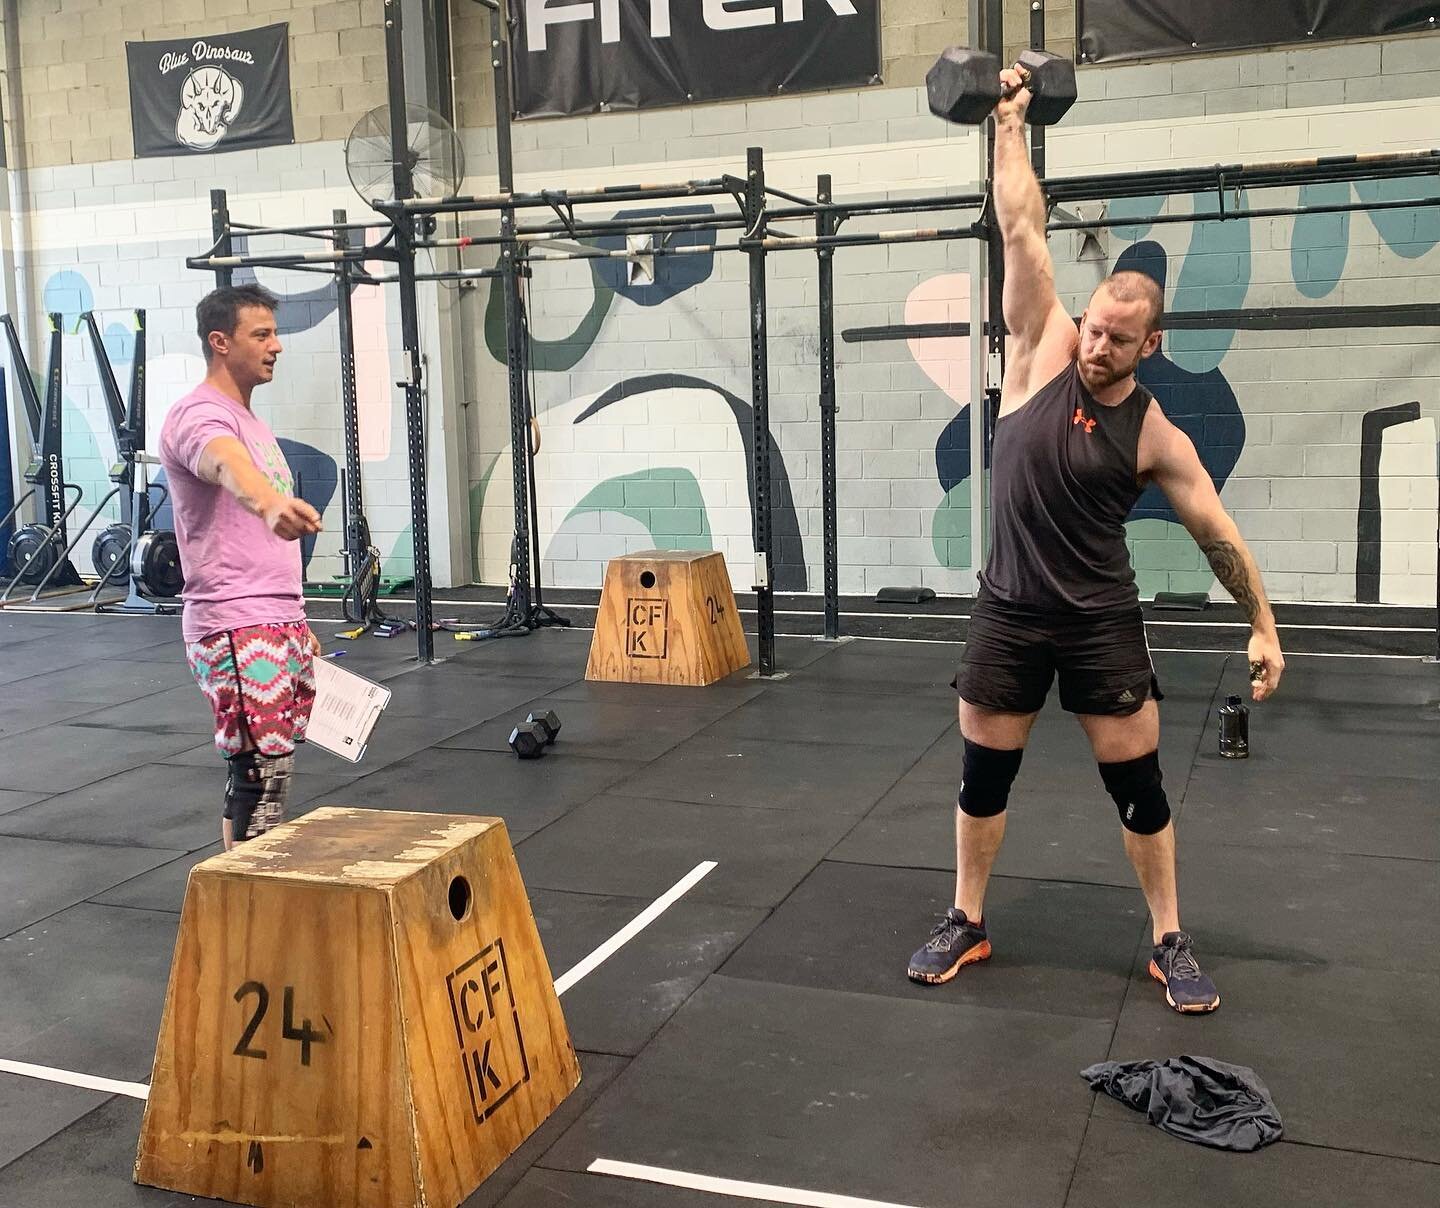 #21point2... gotta love those Dumbbell snatches + Burpee box jumps 💙🤙

#CFK #CrossFit #gains #fitfam